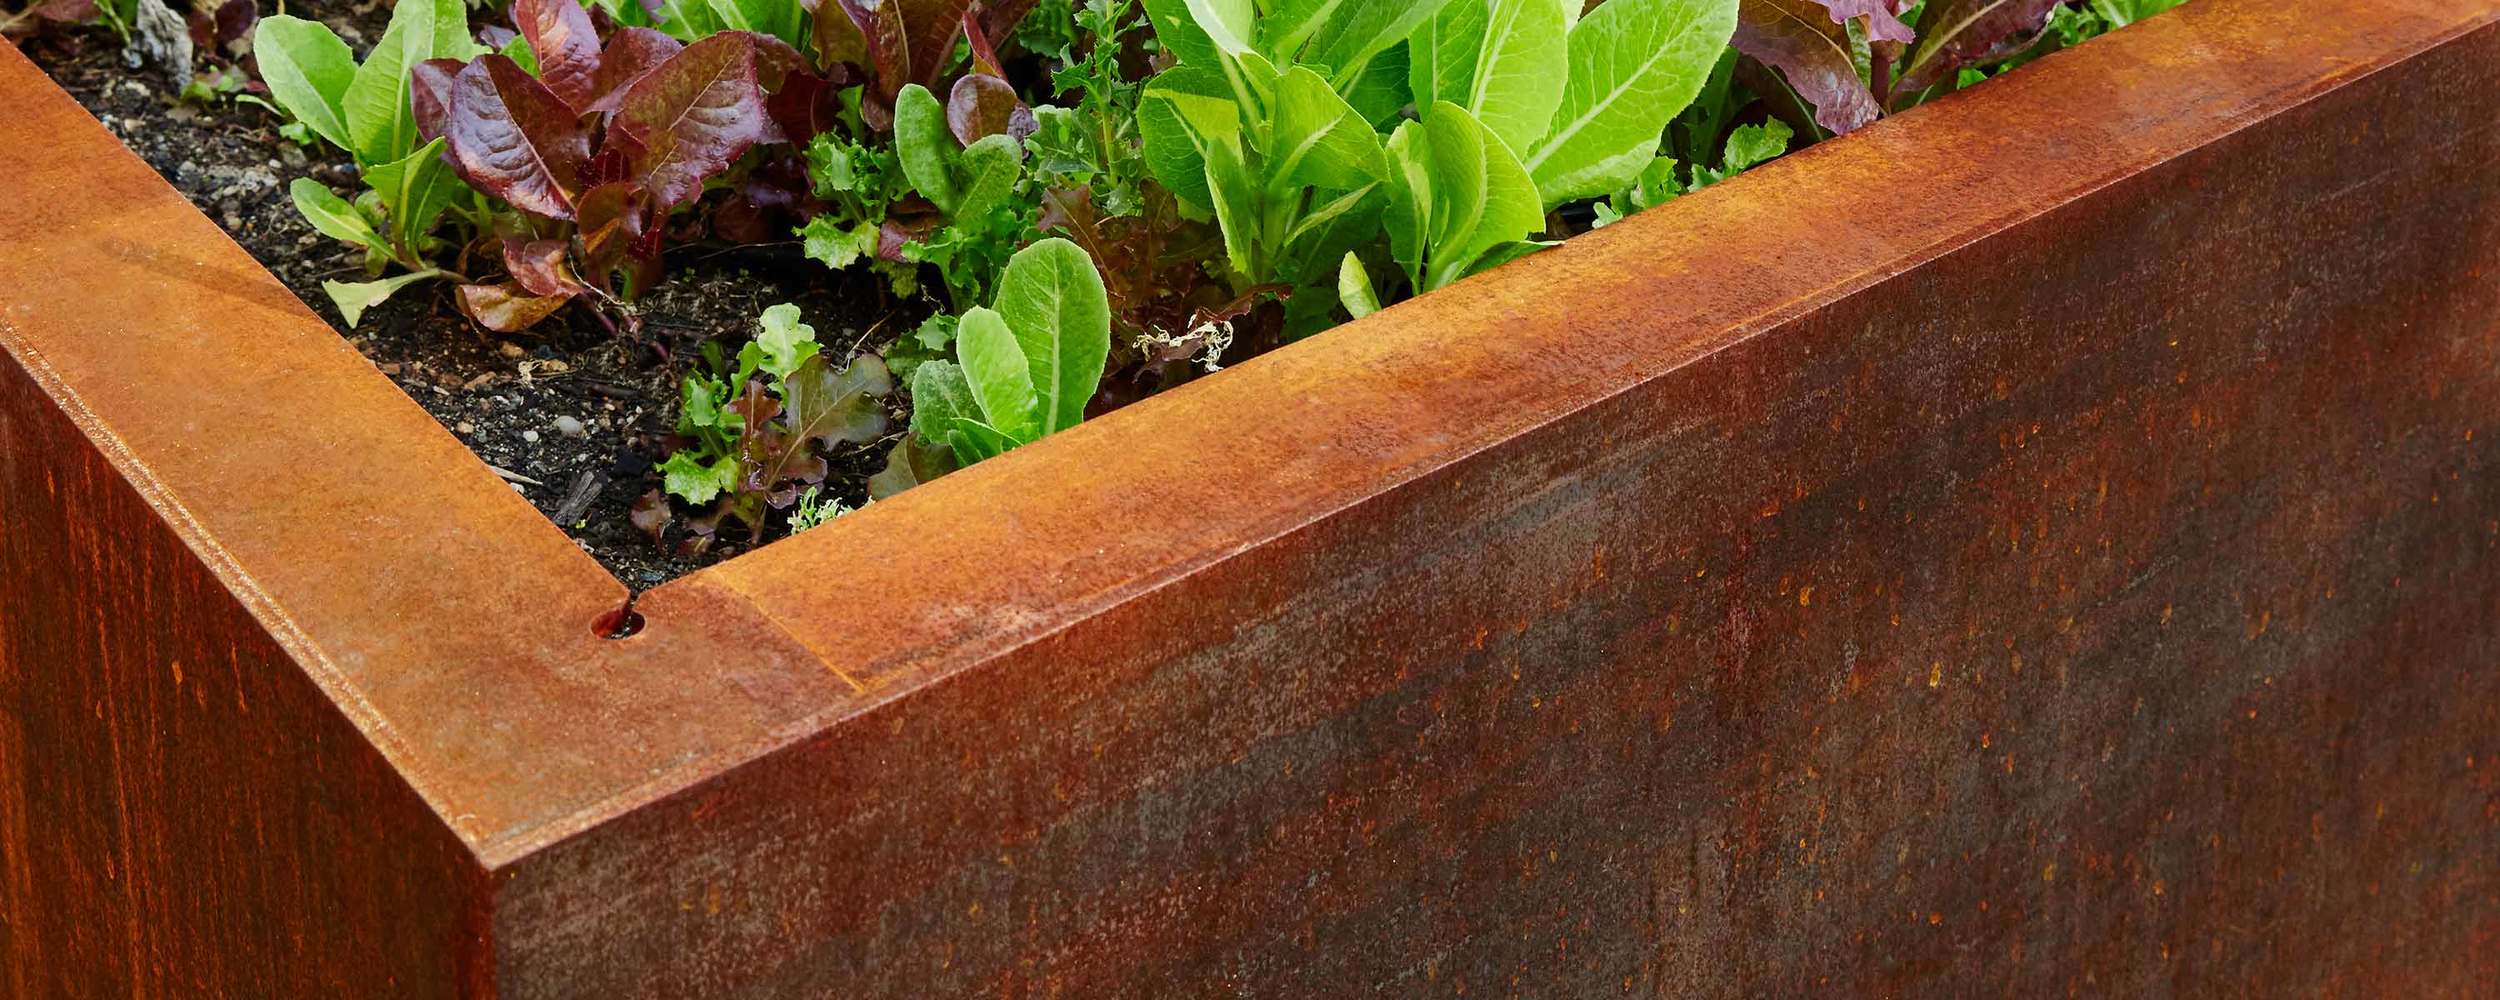  United Nations Architecture Making Studio Planting Bed System Corten Steel 